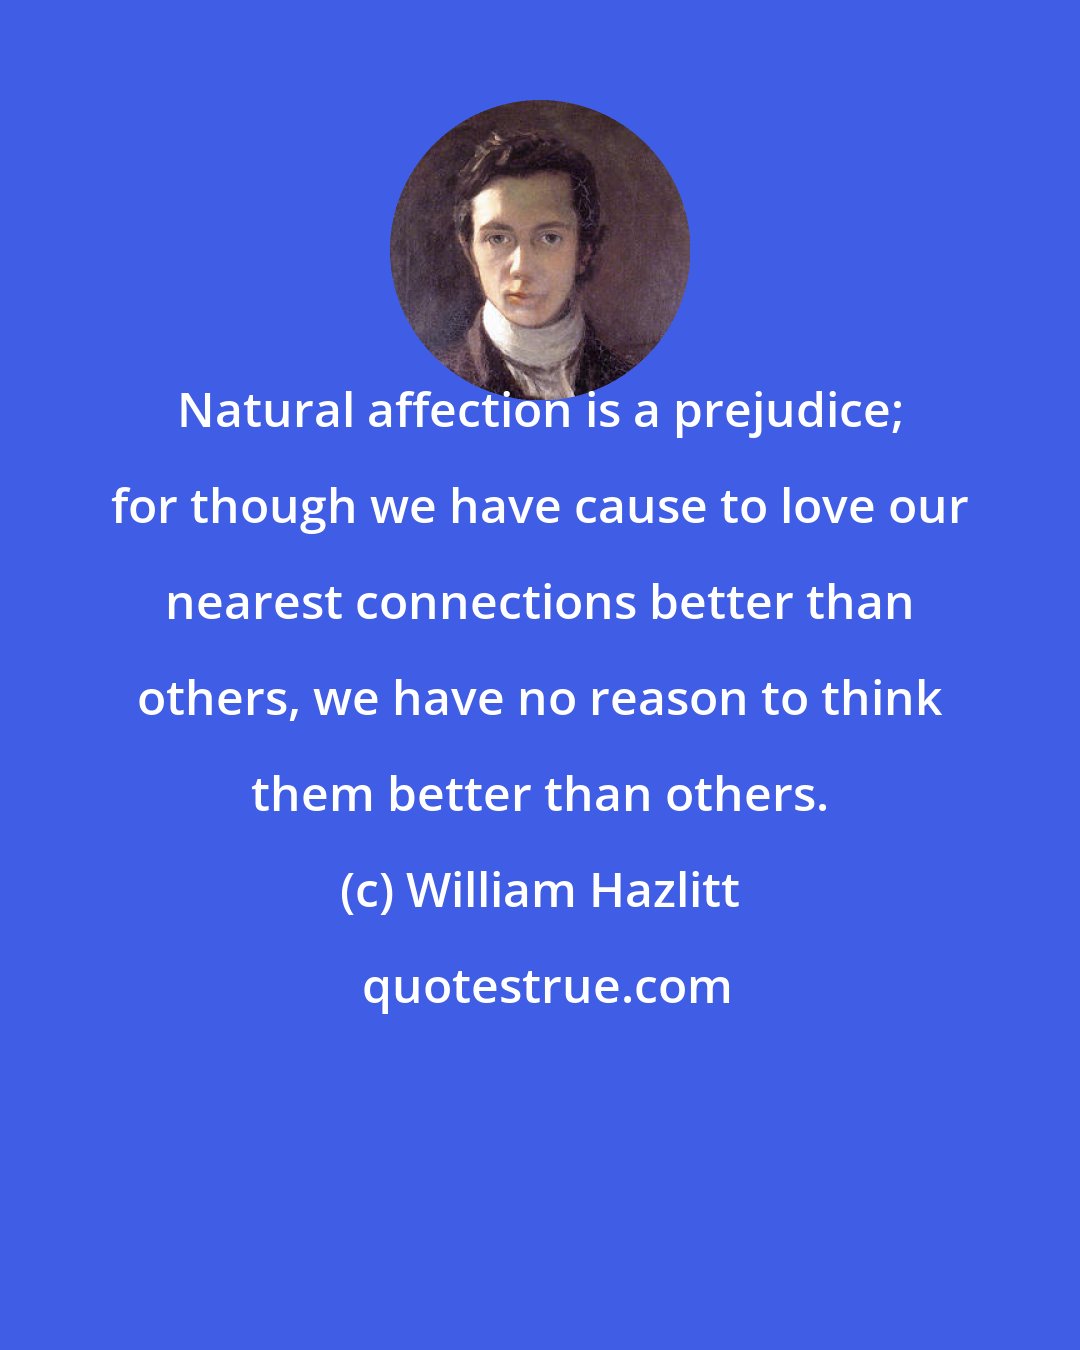 William Hazlitt: Natural affection is a prejudice; for though we have cause to love our nearest connections better than others, we have no reason to think them better than others.